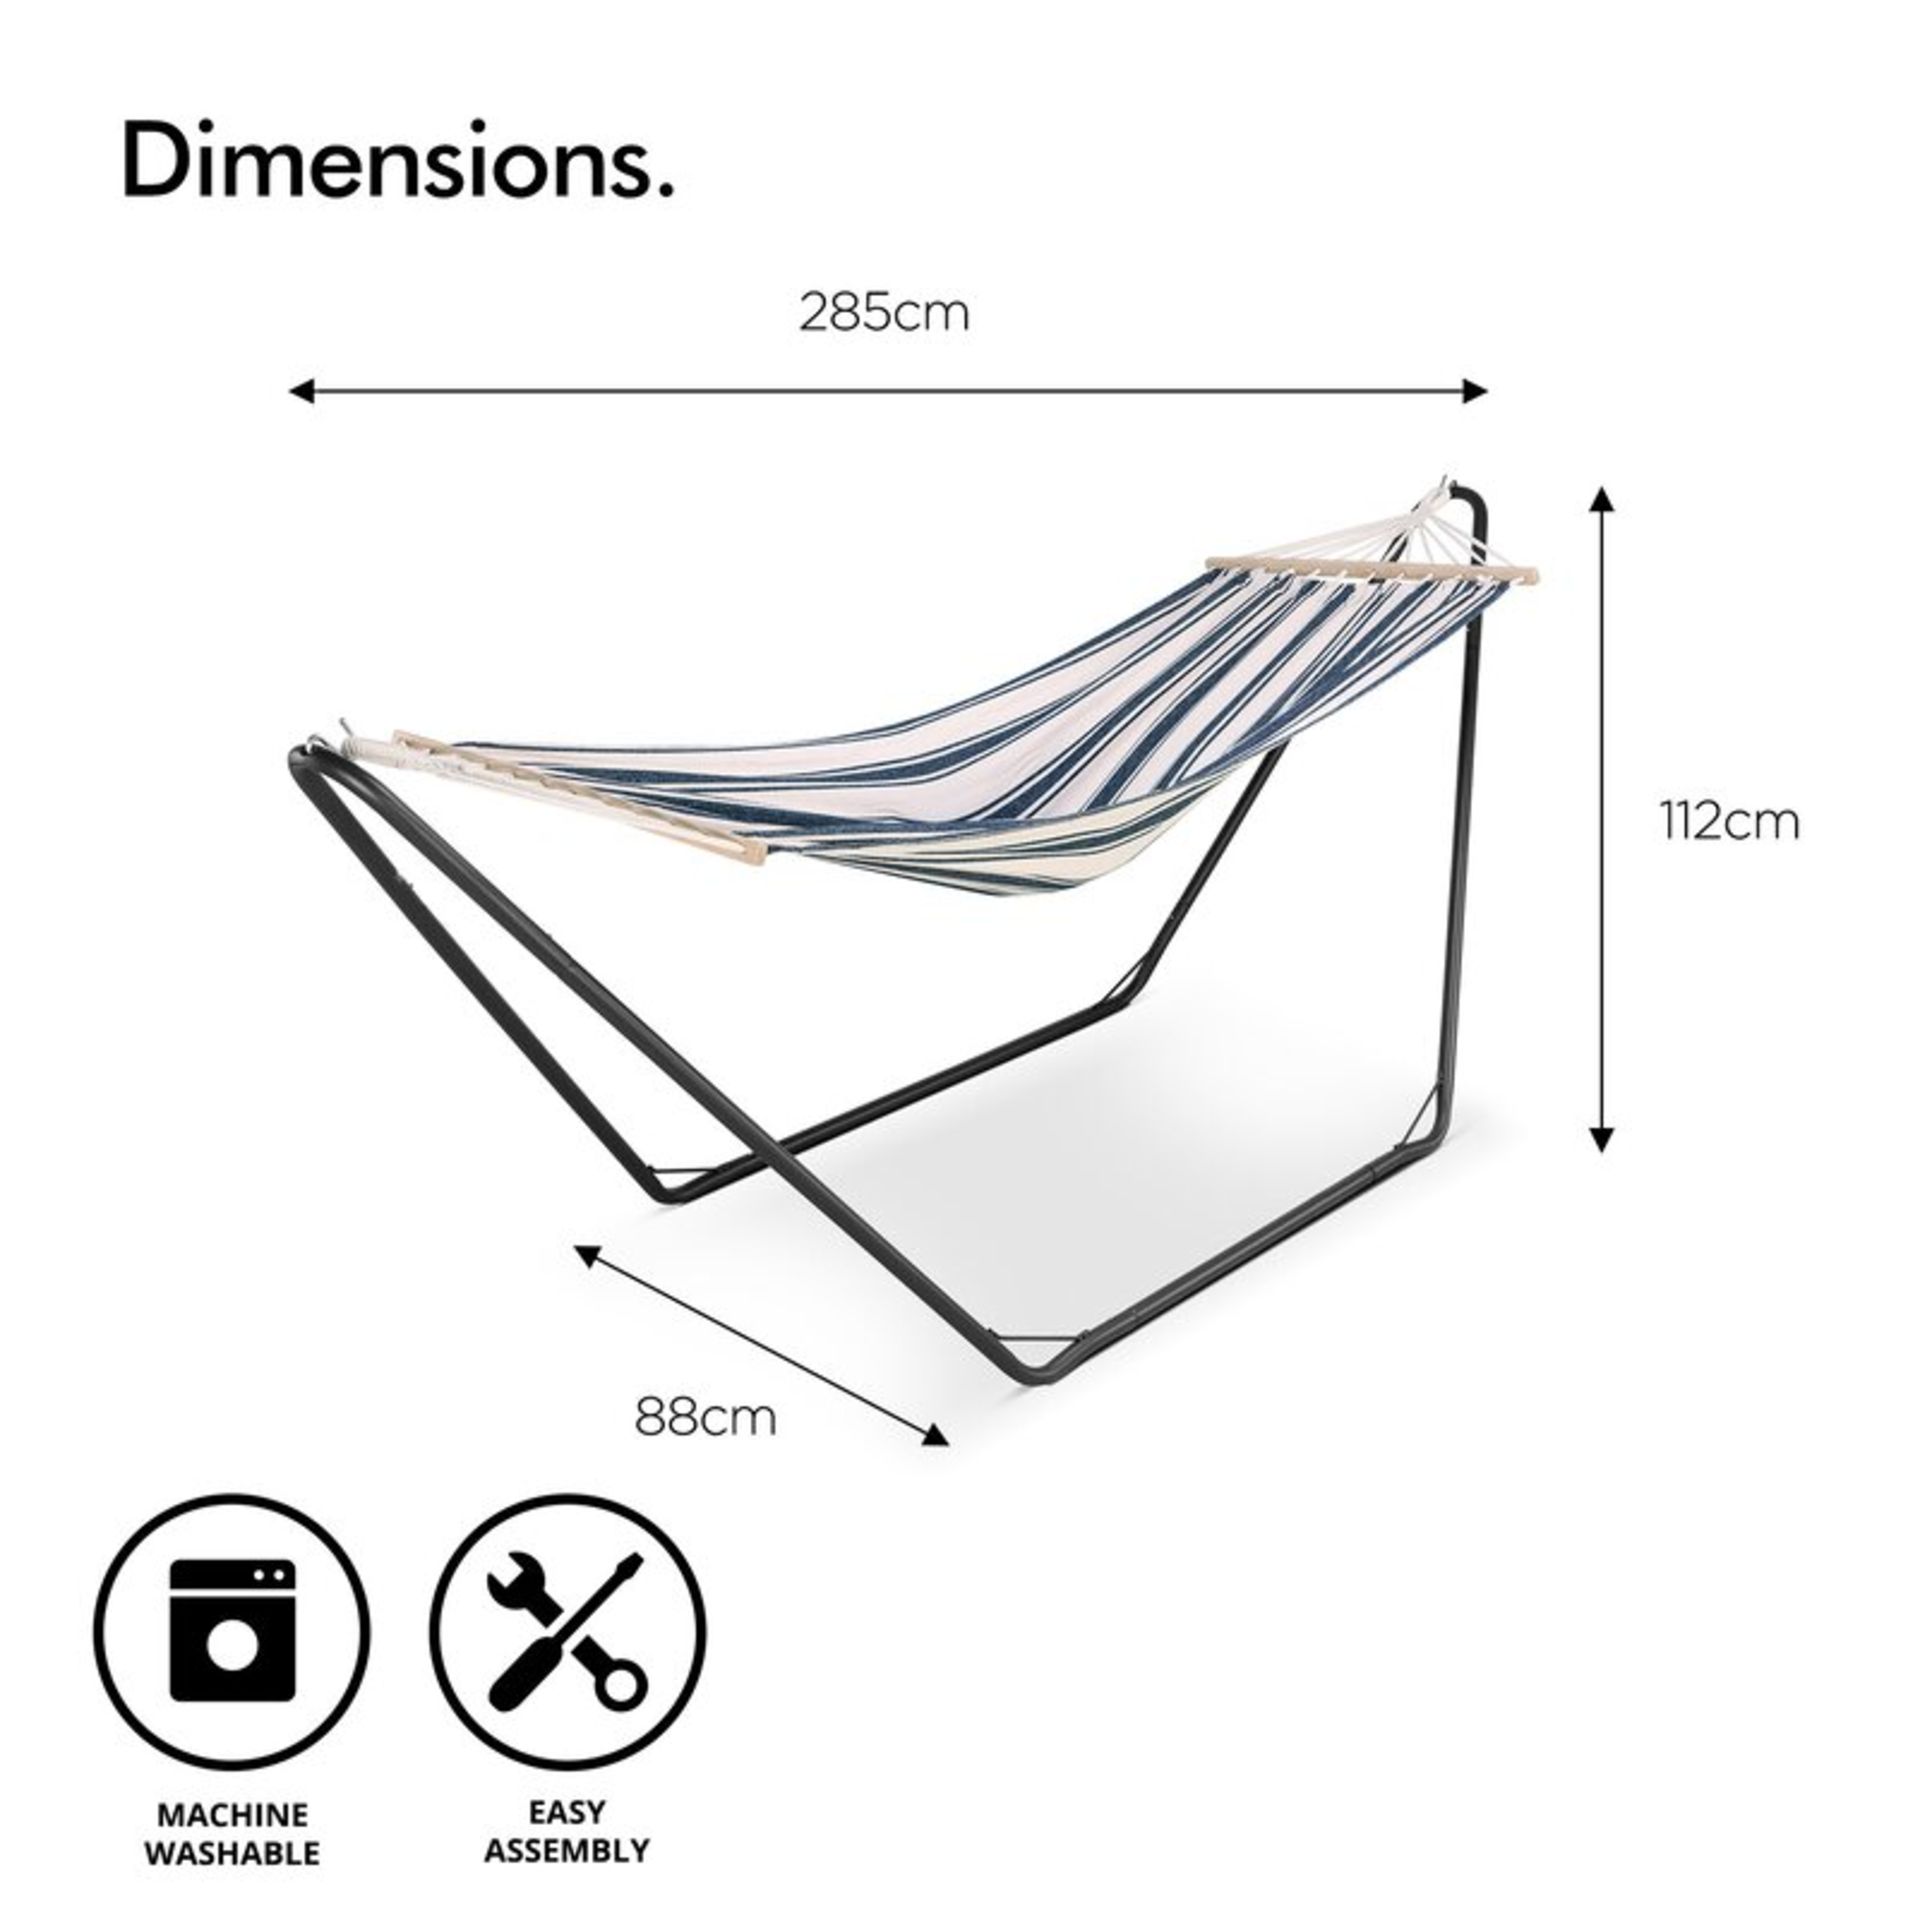 Alegra Hammock Only (Frame not included) - Image 3 of 3